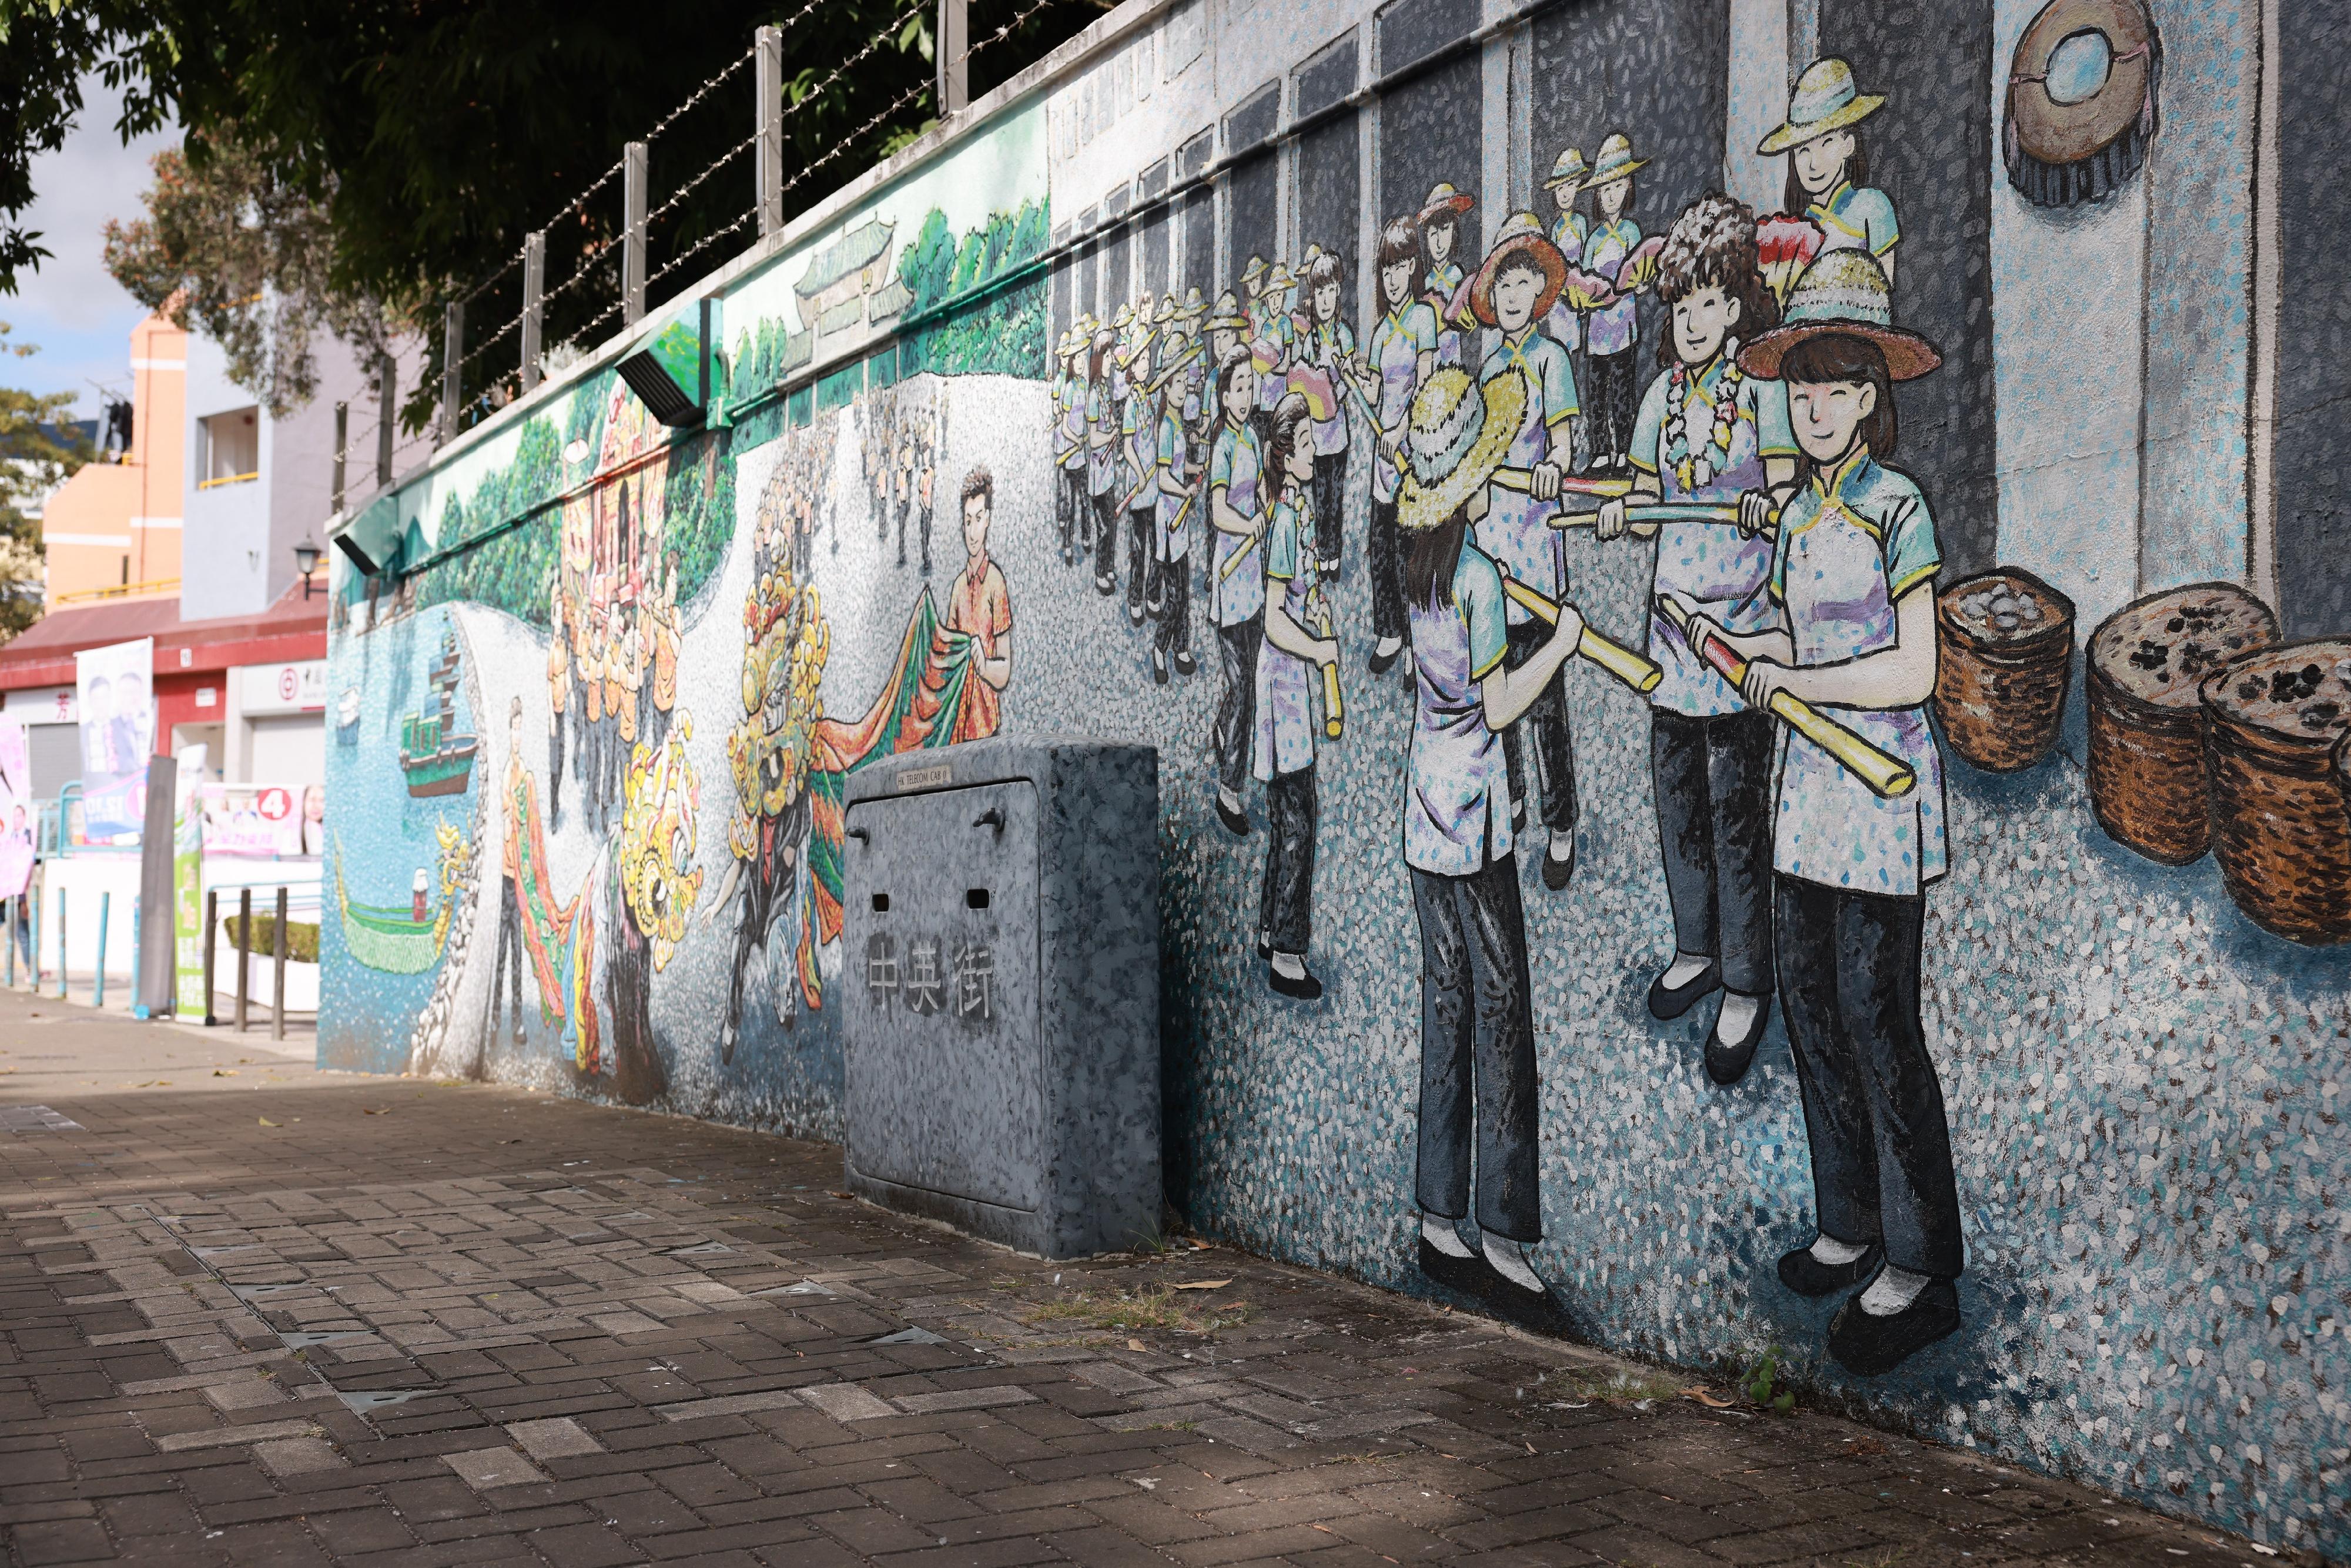 The Second Phase Opening-up of Sha Tau Kok will begin on January 1 next year. Initially, up to 1,000 tourists per day will be allowed to visit all parts of Sha Tau Kok, except Chung Ying Street, after applying online for a Closed Area Permit. Photo shows the mural paintings at Shun Ping Street depicting traditional cultural activities in Sha Tau Kok.
